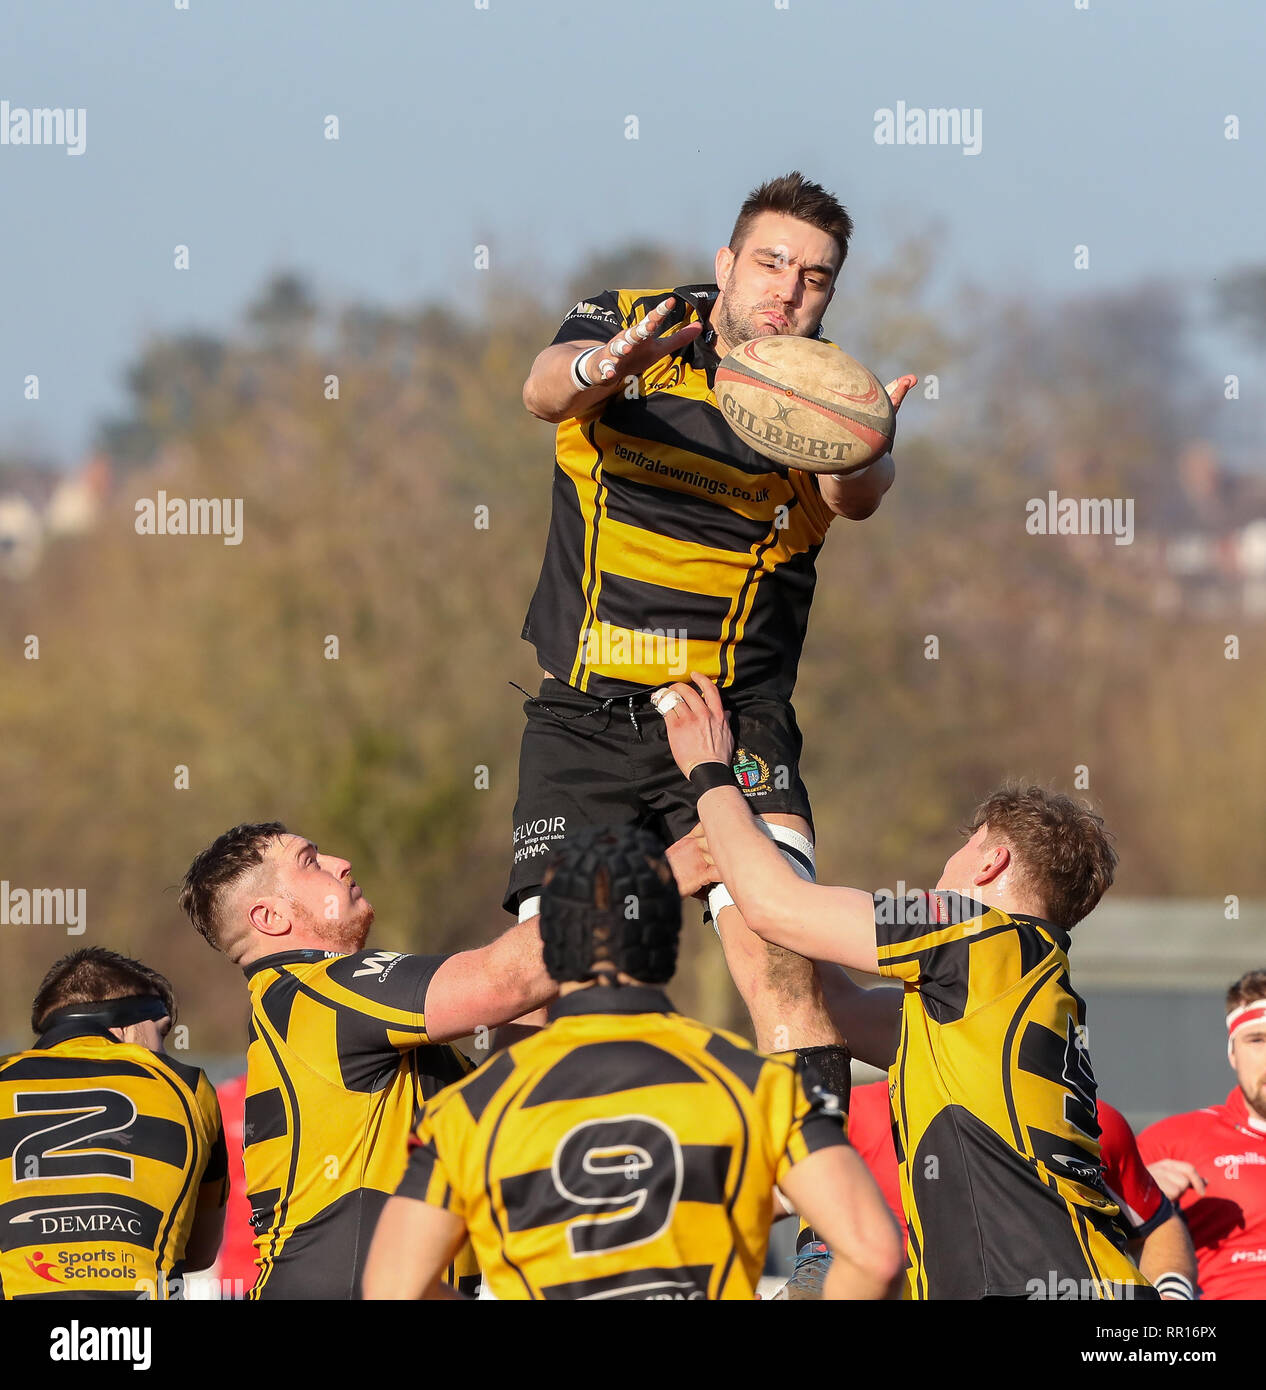 23.02.2019 Hinckley, Leicester, England. Rugby Union, Hinckley rfc v Chester rfc.   Ben Marshall takes the line out for Hinckley during the RFU Nation Stock Photo